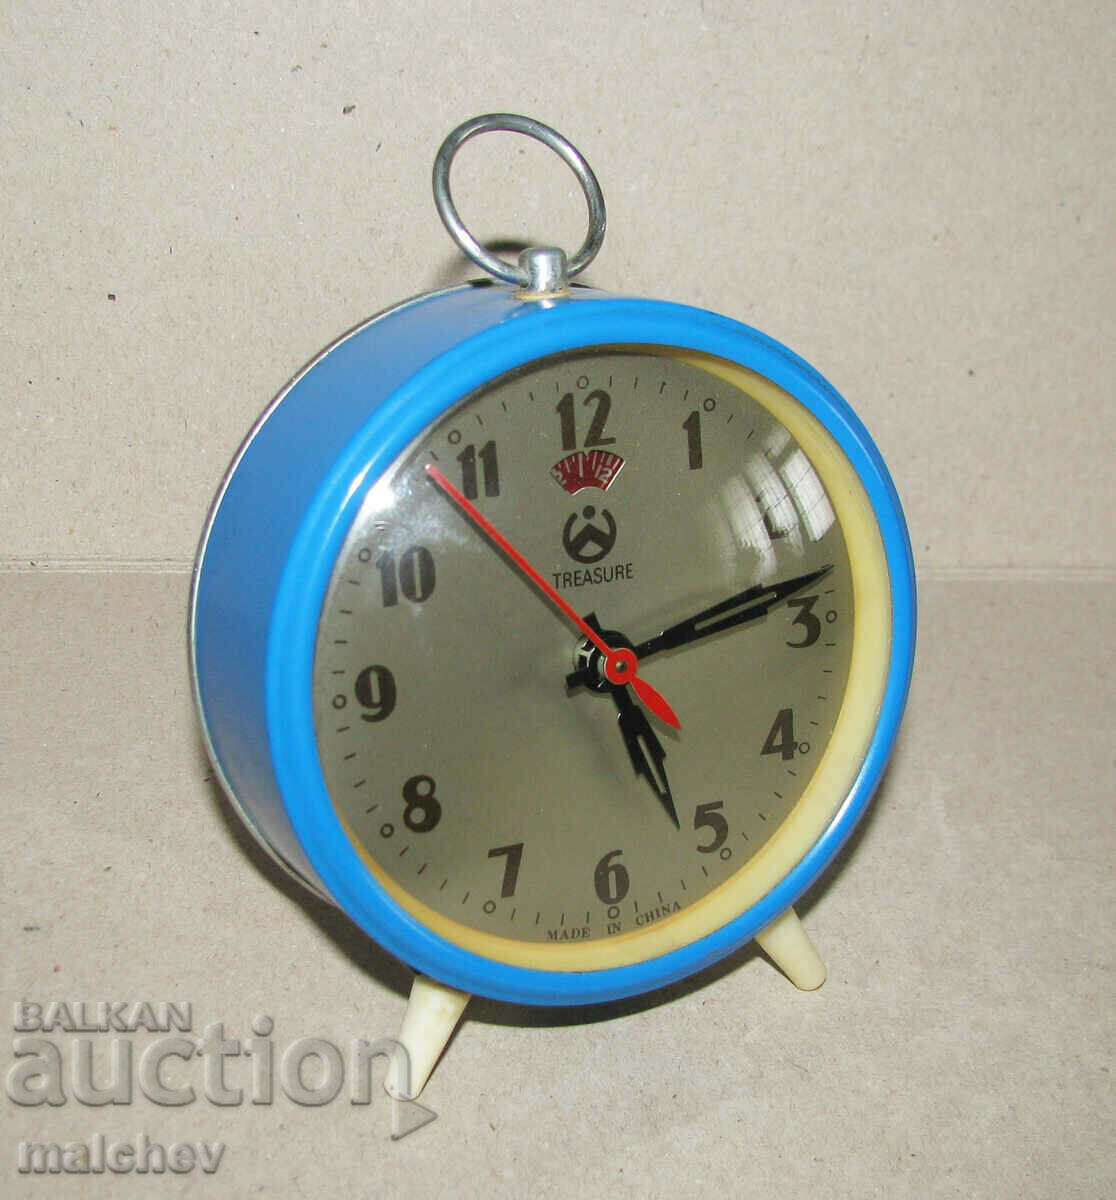 Chinese Treasure Mechanical Alarm Clock, Near Excellent